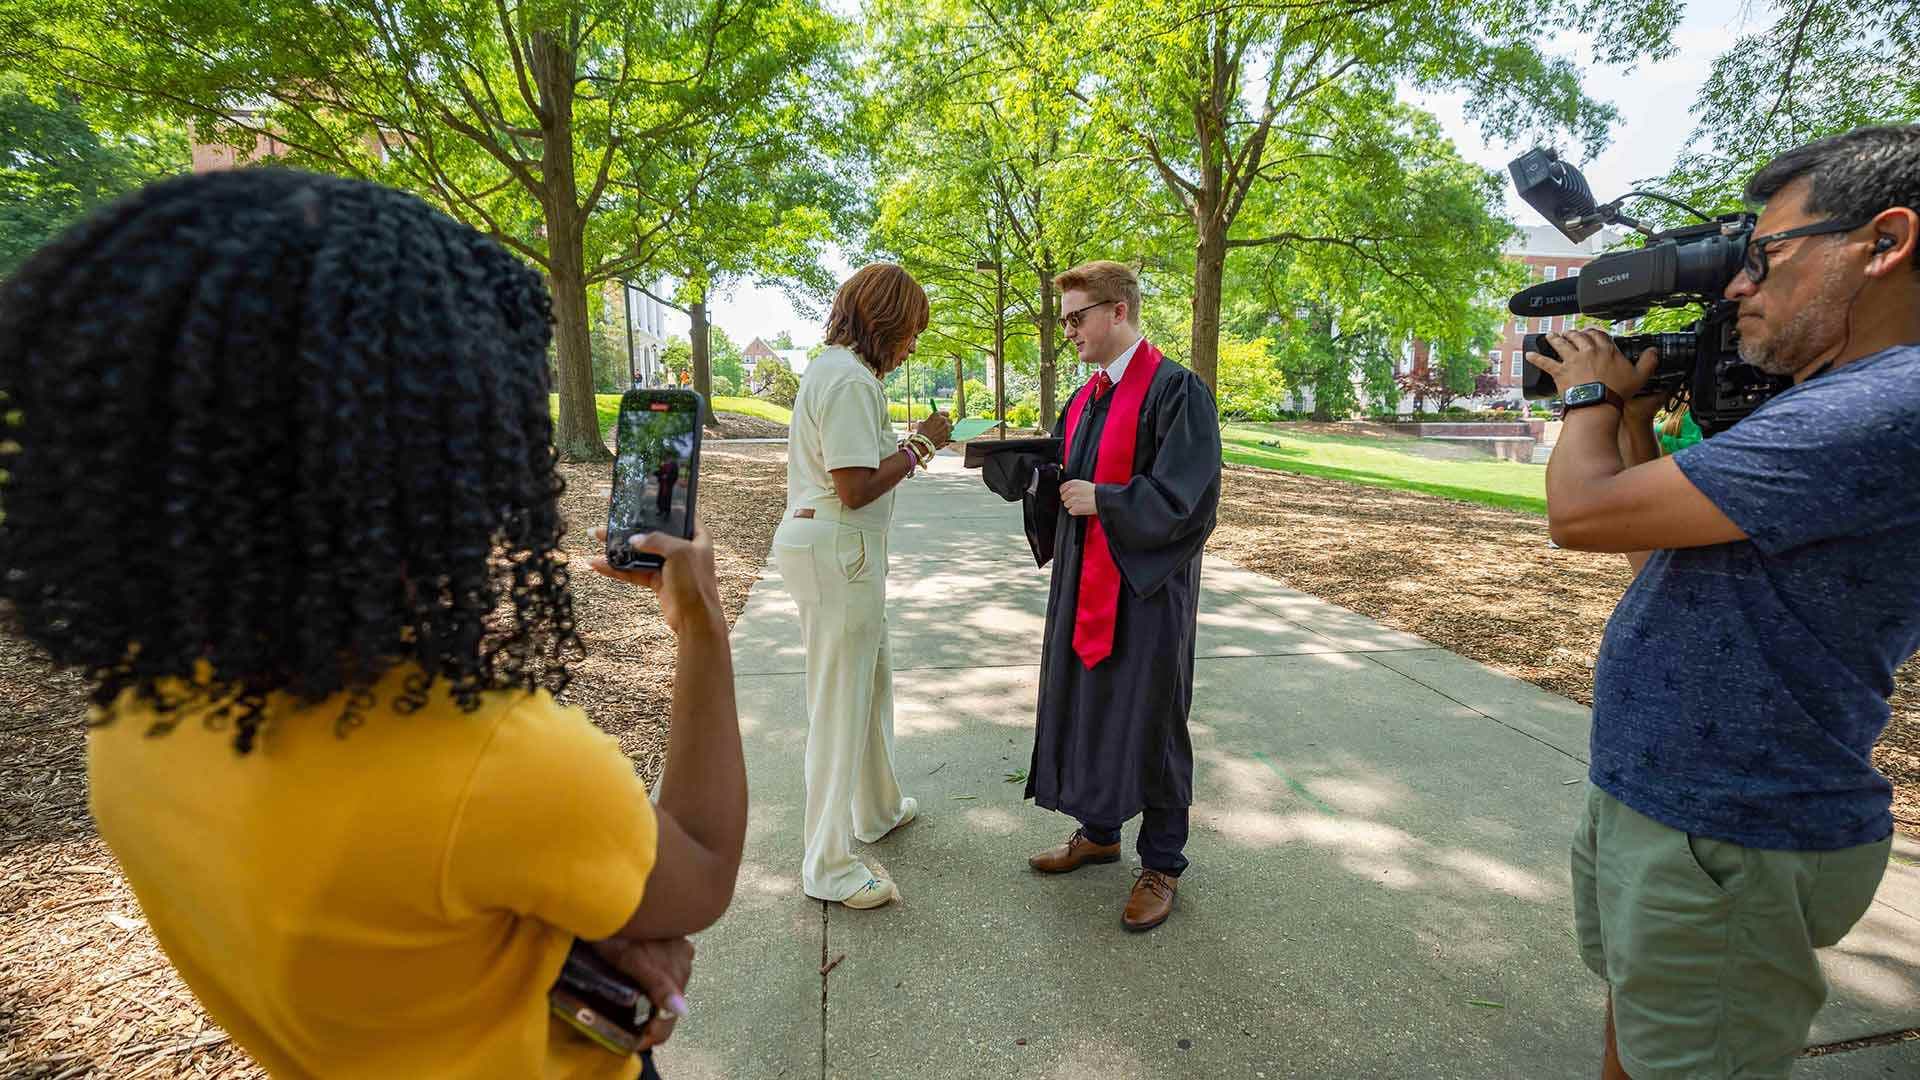 Gayle King talks to a student, who is wearing graduation regalia